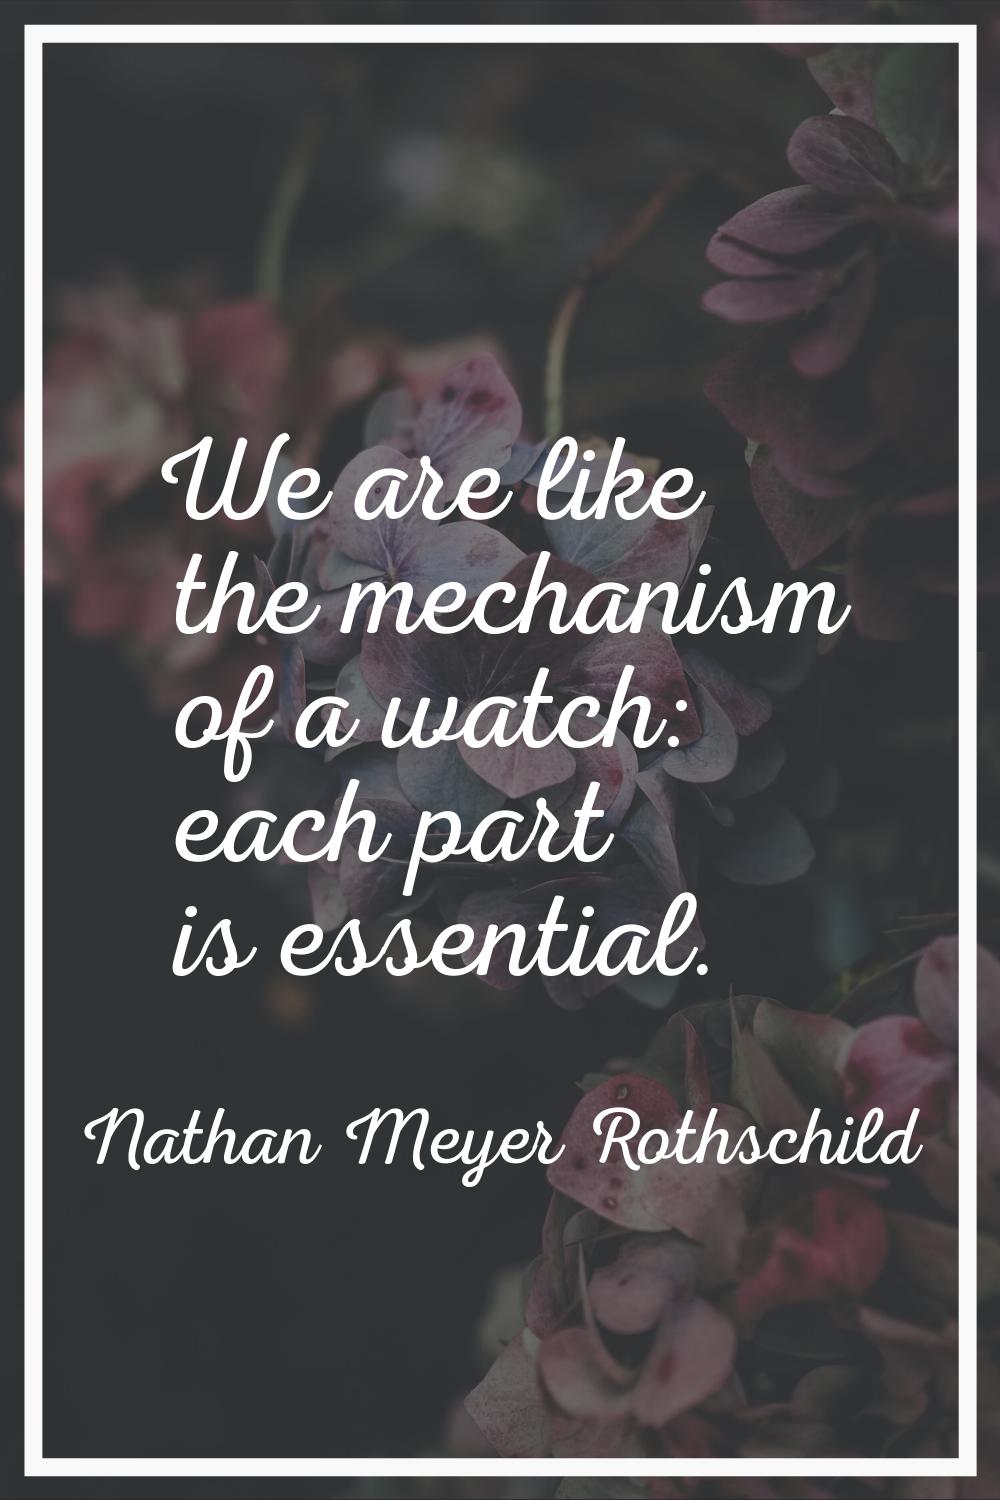 We are like the mechanism of a watch: each part is essential.